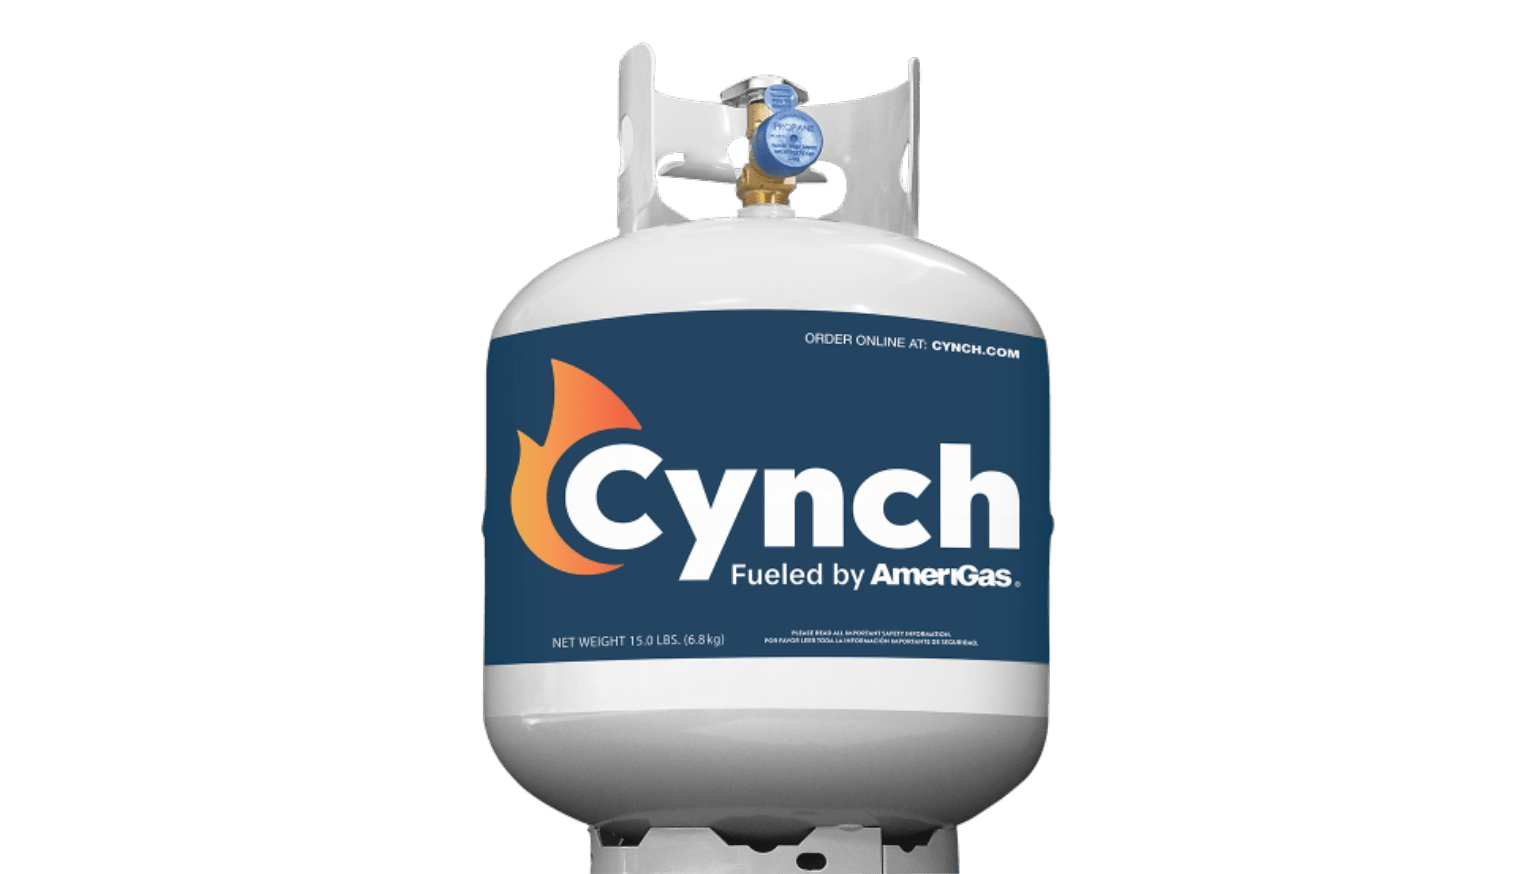 Cynch Propane Tank Delivery